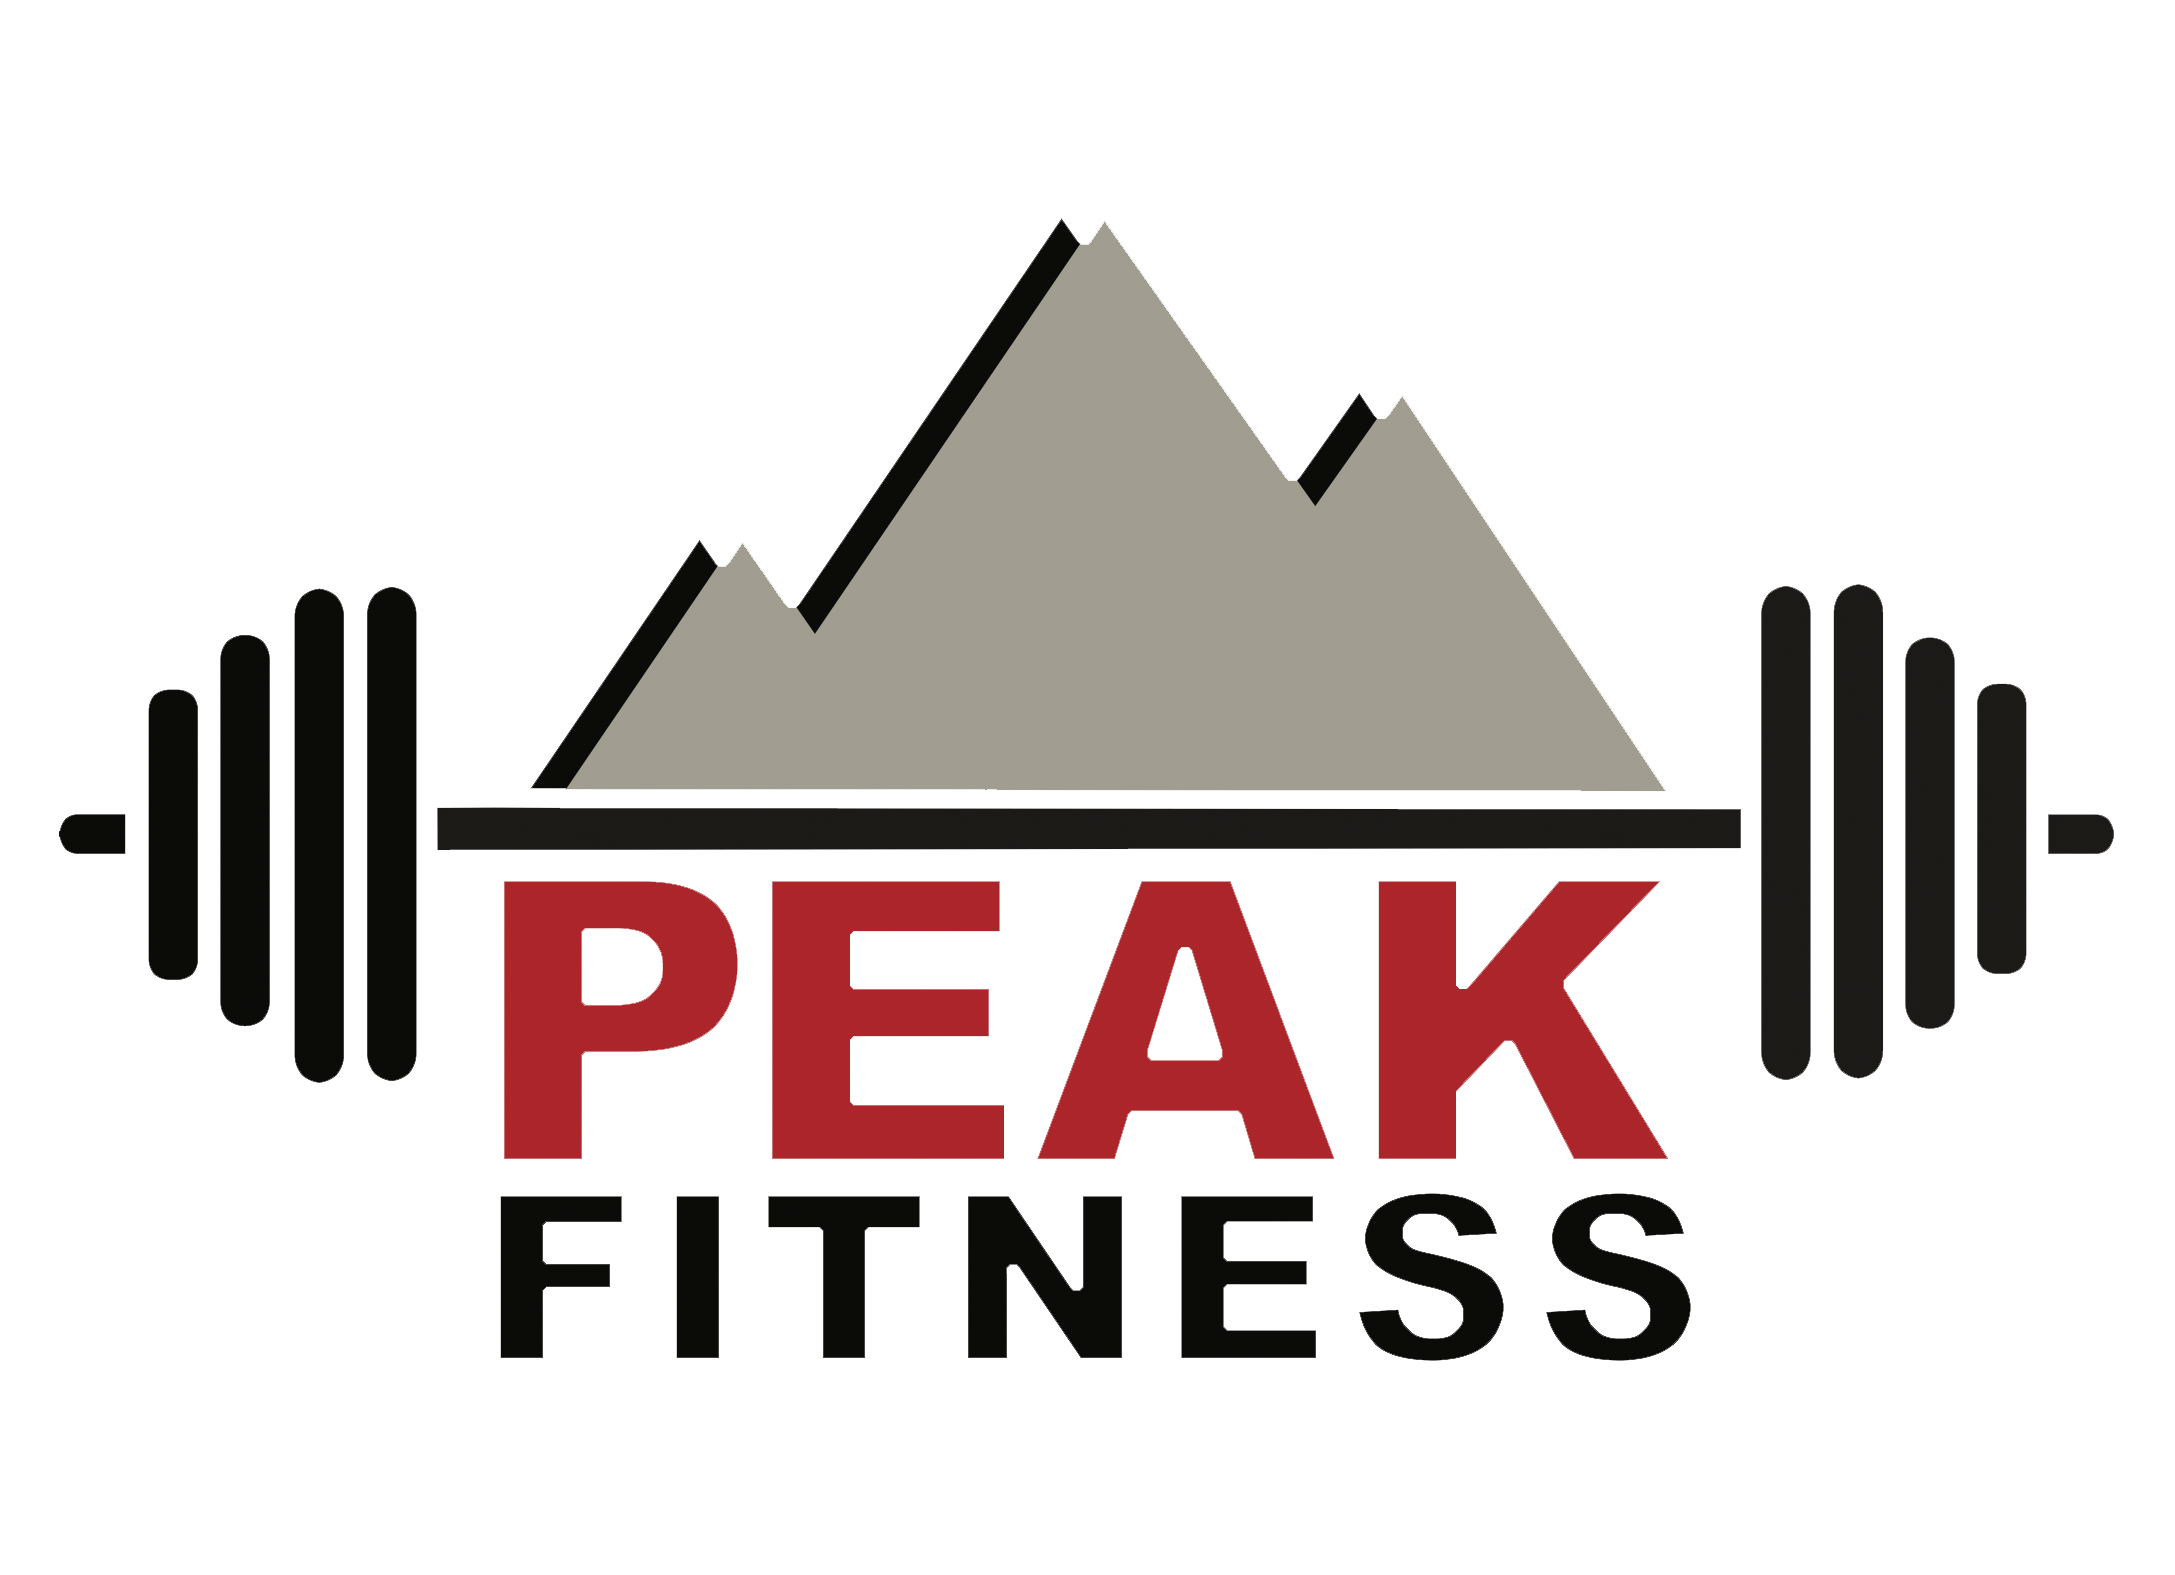 peak fitness star valley with no background and outlined in white